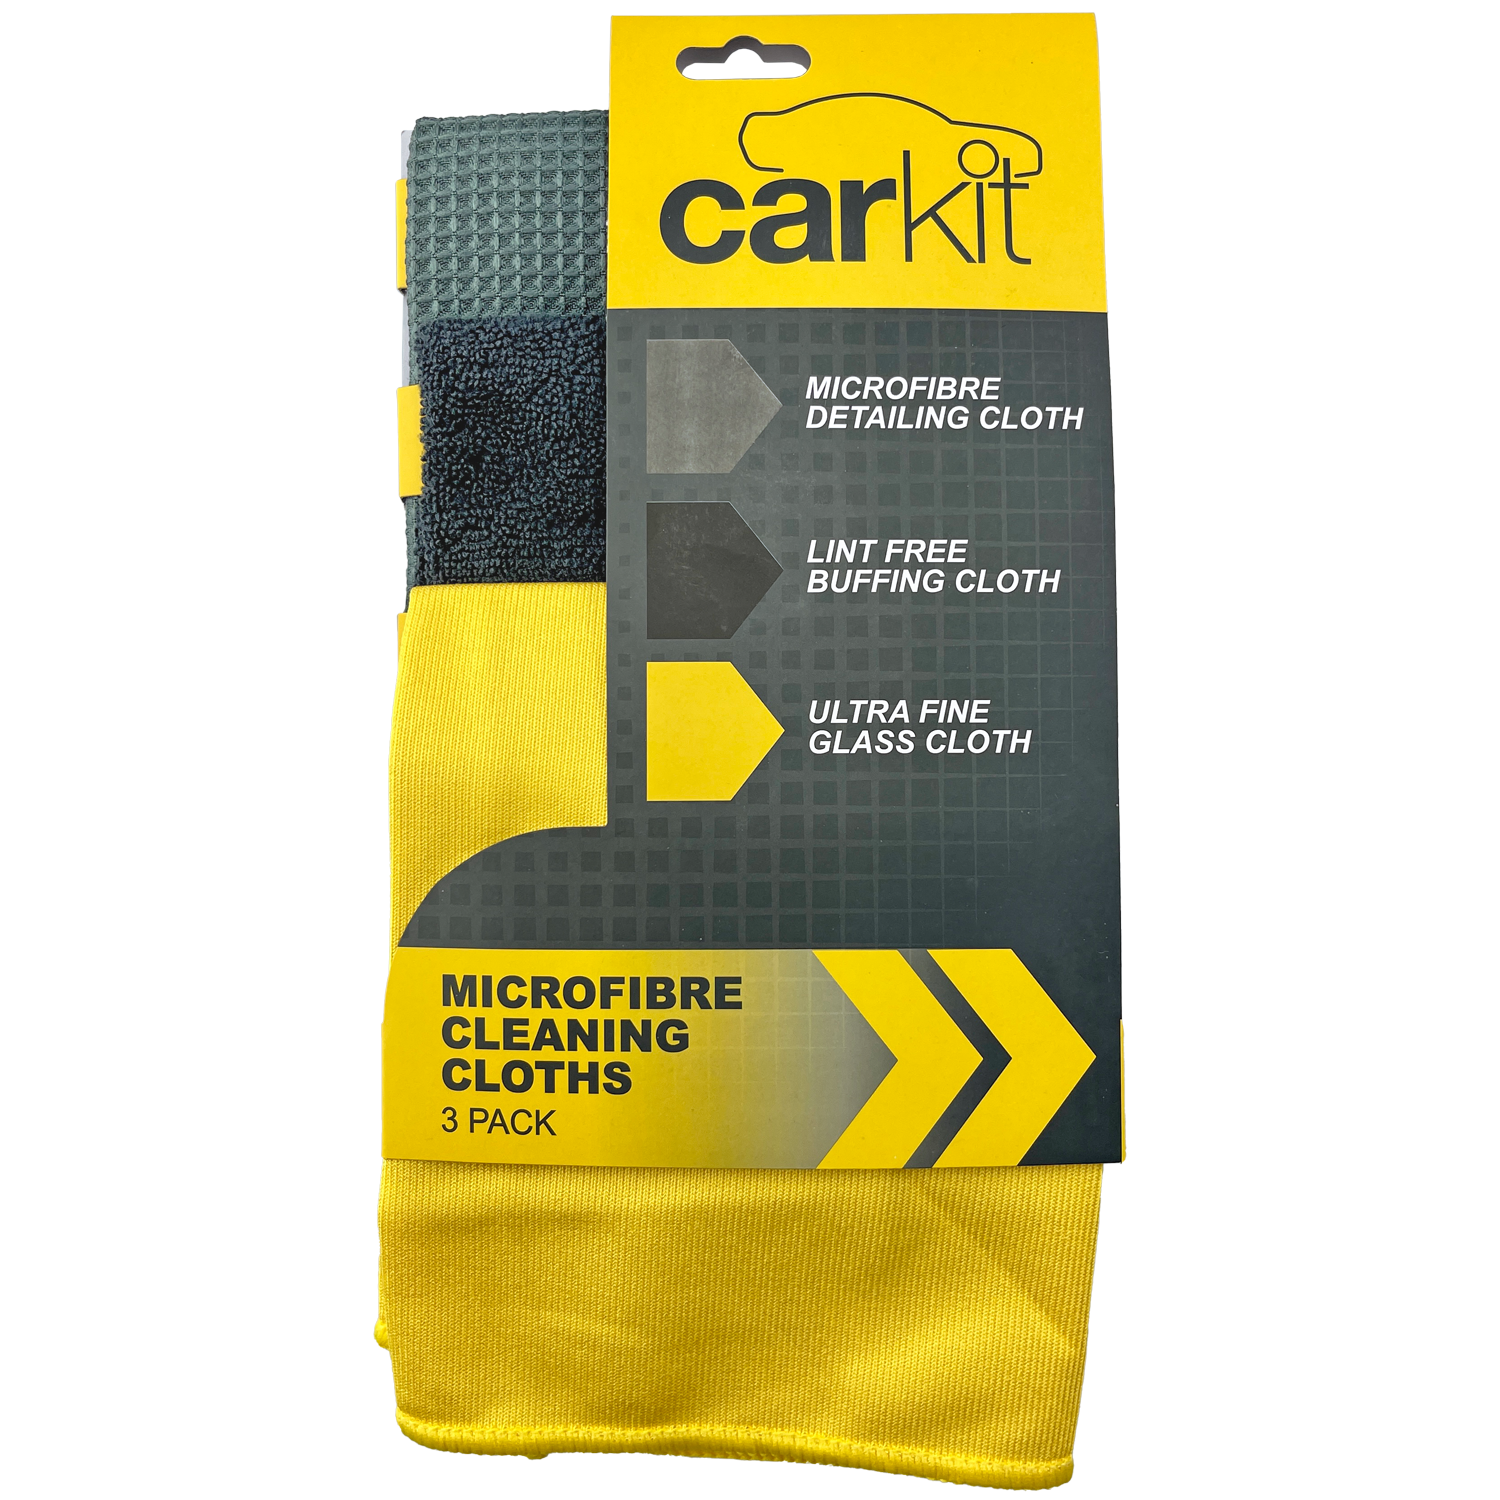 CarKit Pack of 3 Microfibre Cleaning Cloths Image